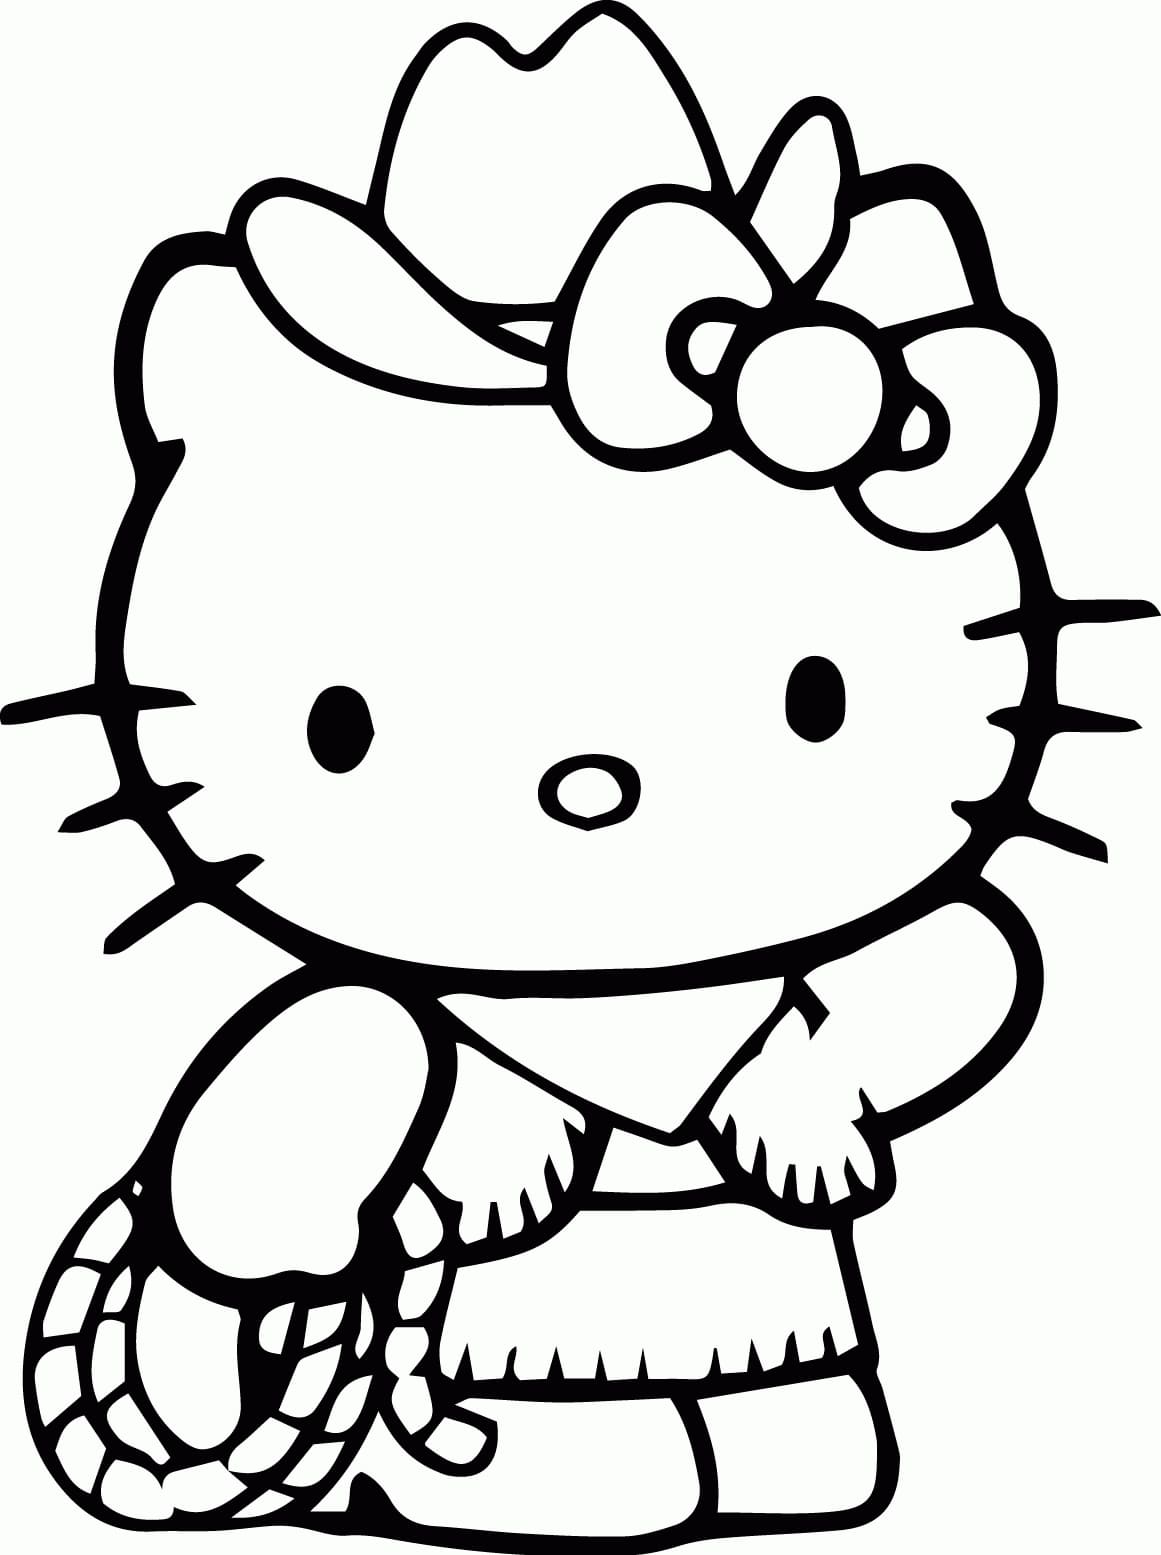 Printable Hello Kitty Image coloring page - Download, Print or